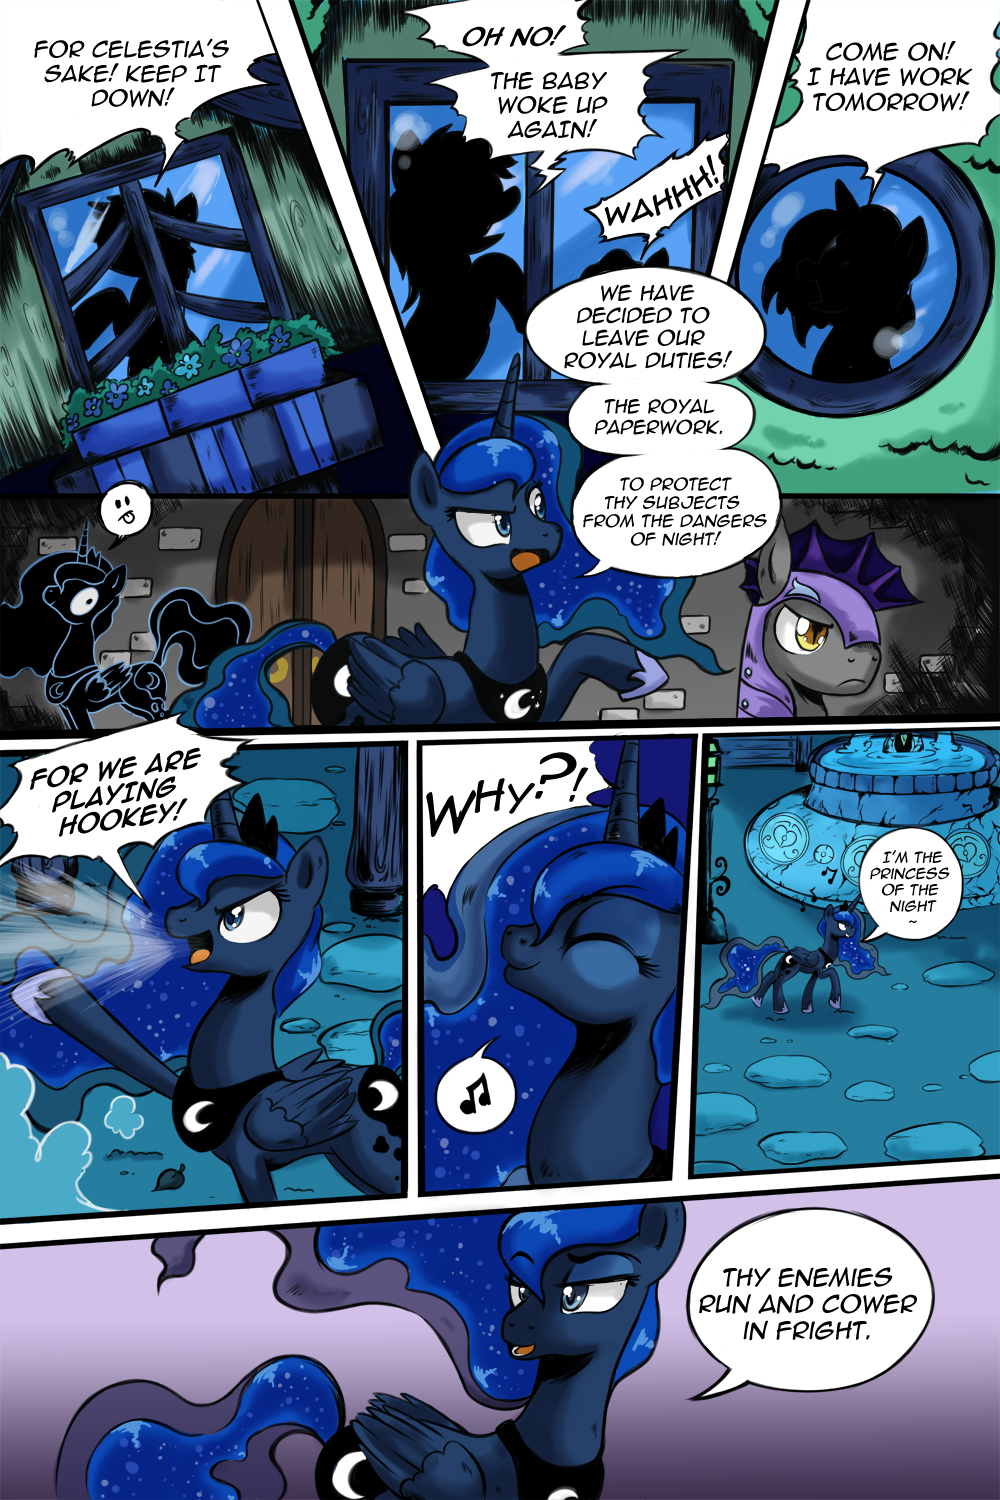 mlp_the_fallen_moon_chapter_1_page_6_by_guardian_core-d5vj4ft.png